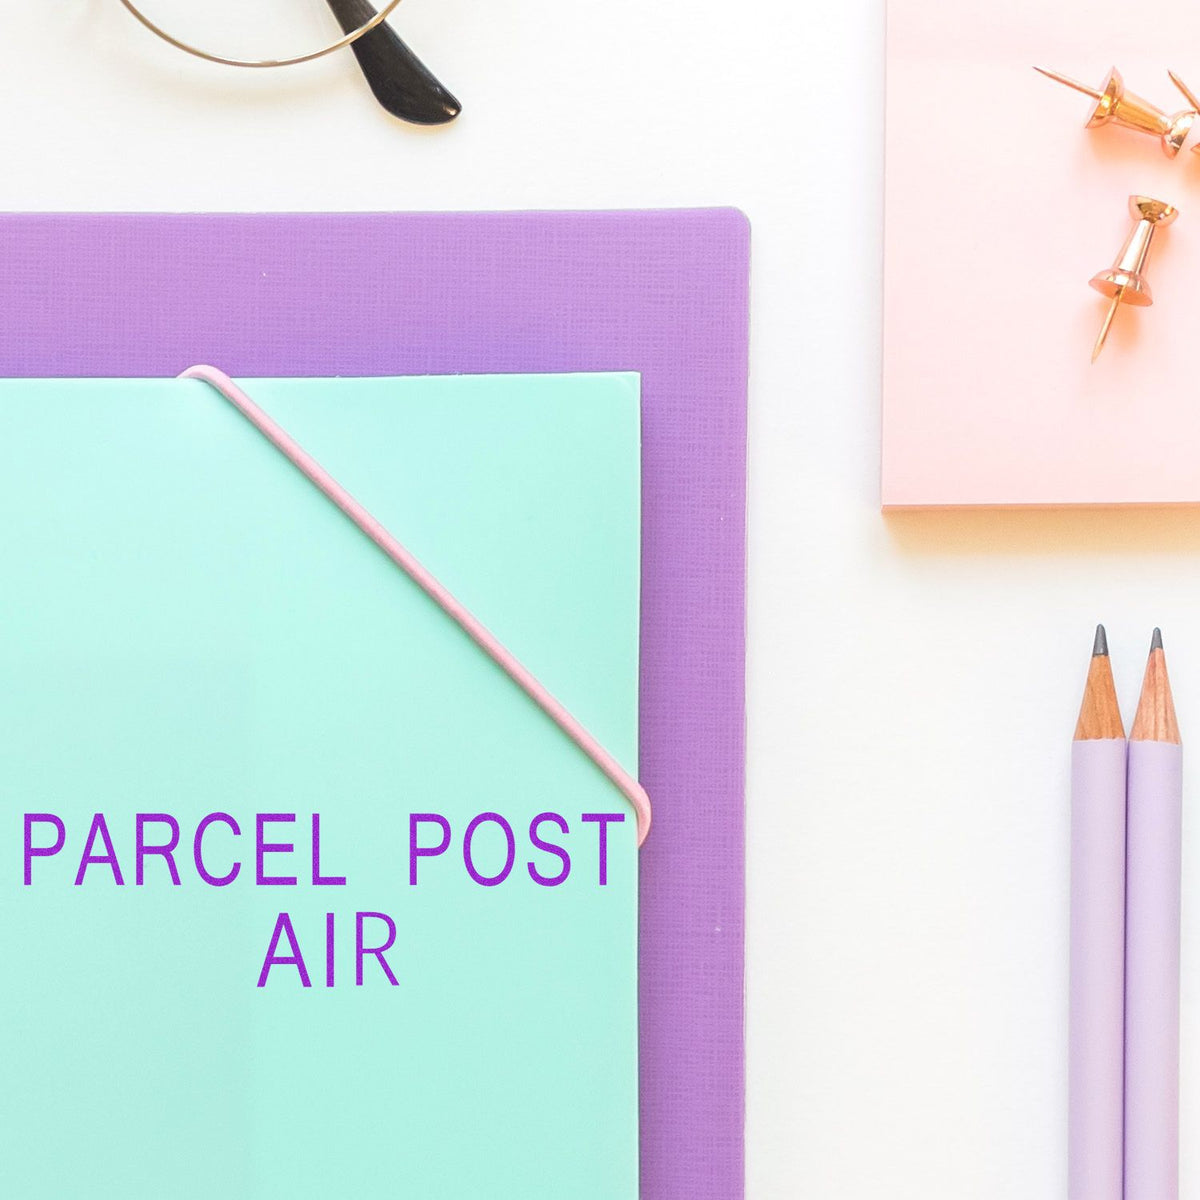 Self-Inking Parcel Post Air Stamp In Use